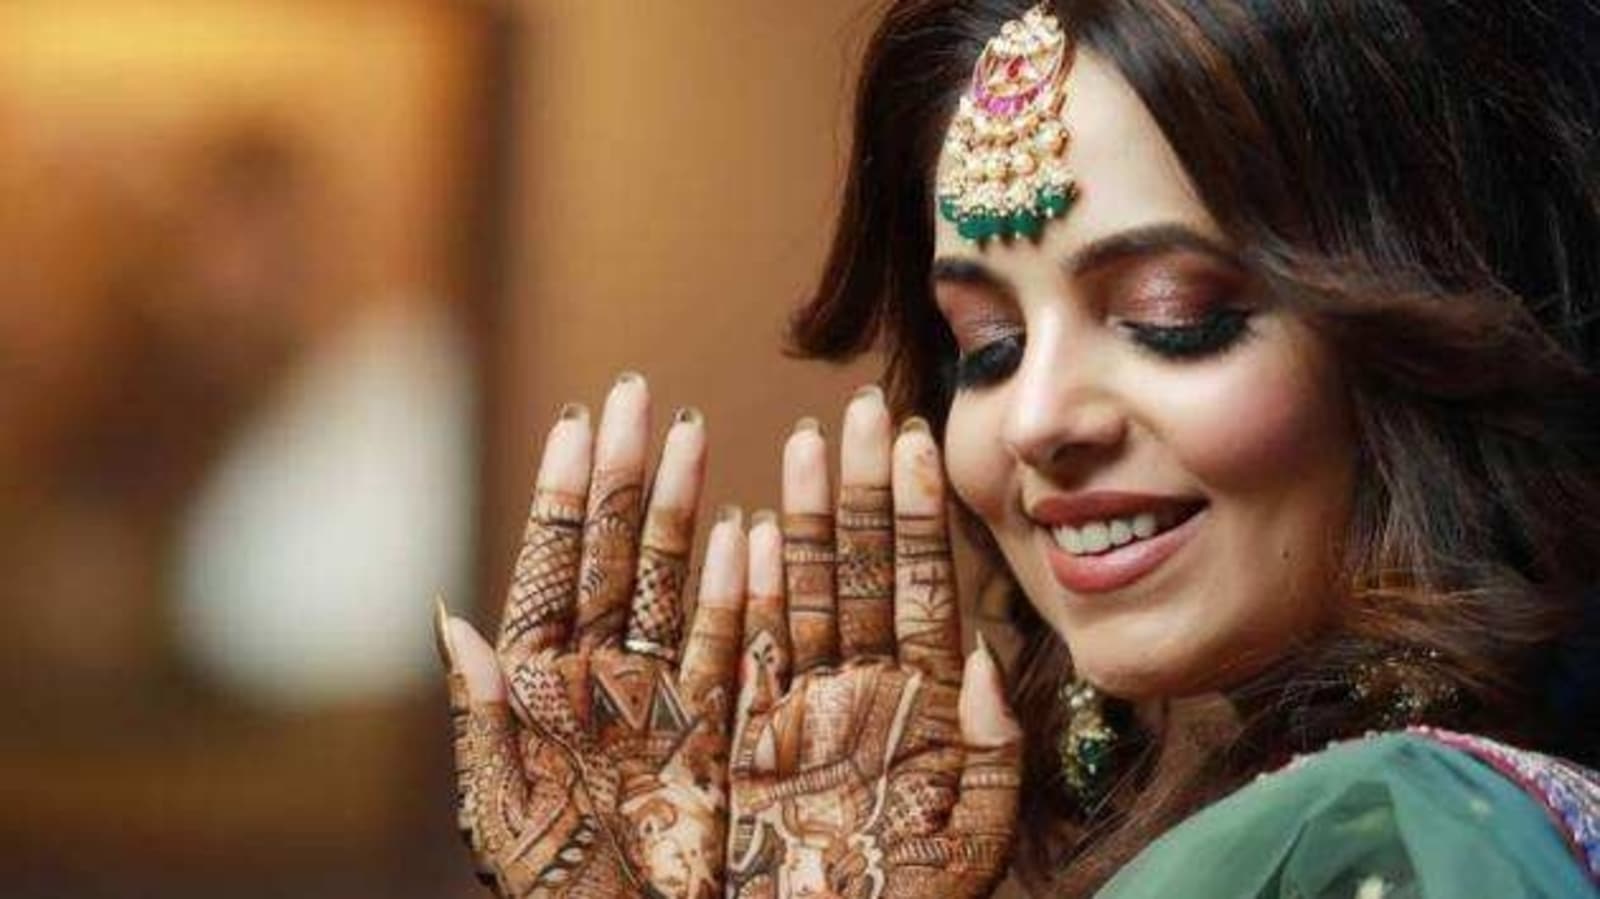 Ideas for mehndi pose for the best wedding photography in Chennai